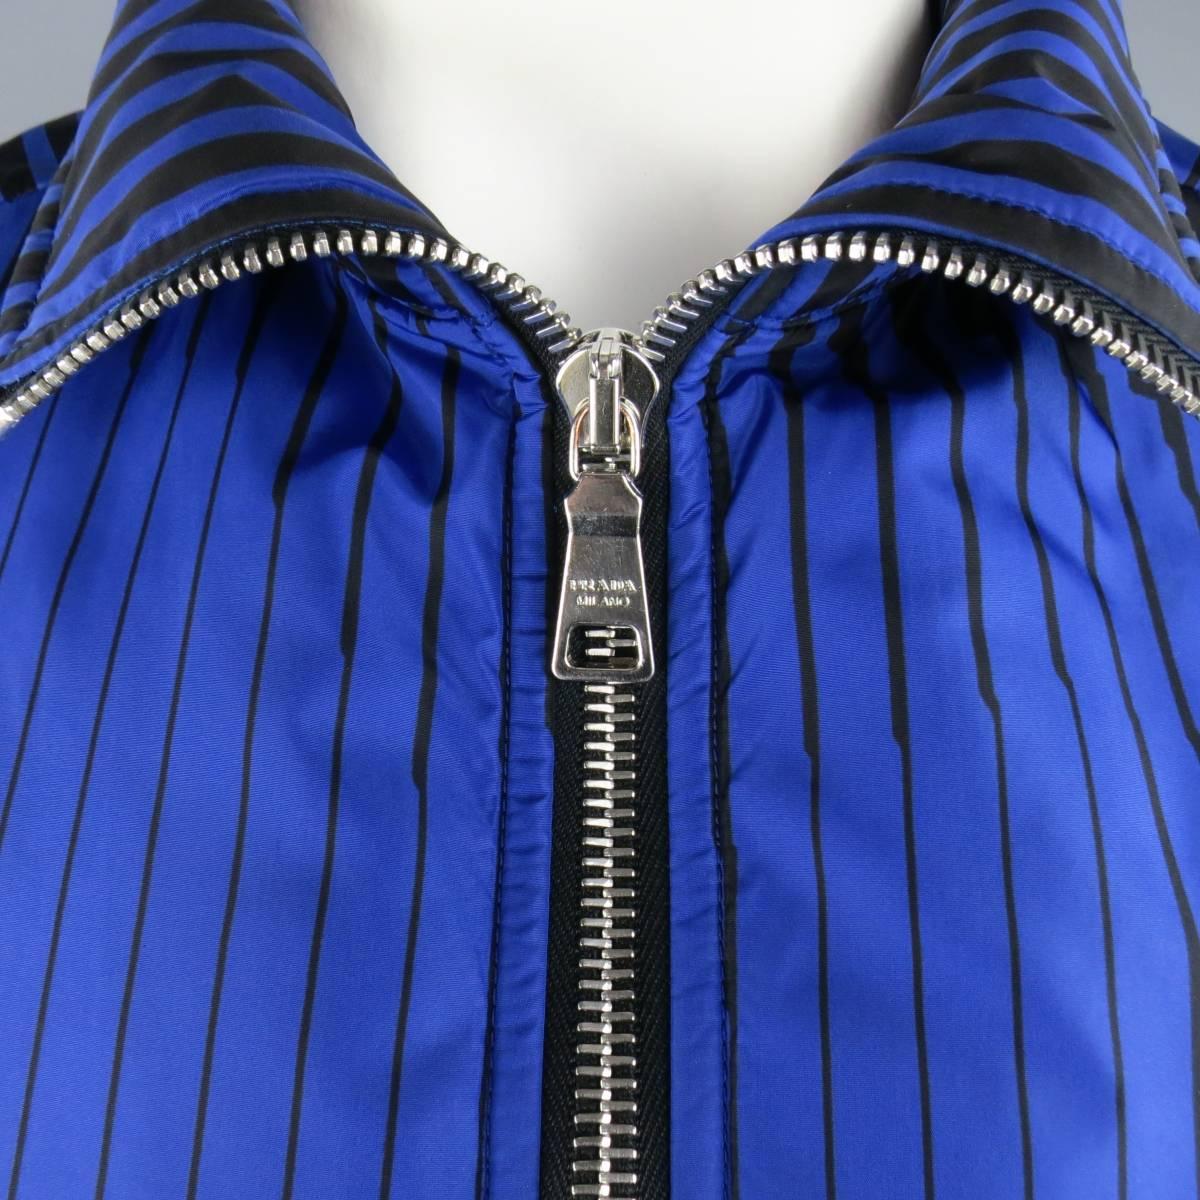 PRADA fall 2008 puffer jacket in an abstract royal blue and black striped nylon featuring a high collar, thick silver tone zip closure, hidden placket zip pockets, and ribbed side panels. Made in Italy.
 
Excellent Pre-Owned Condition.
Marked: IT